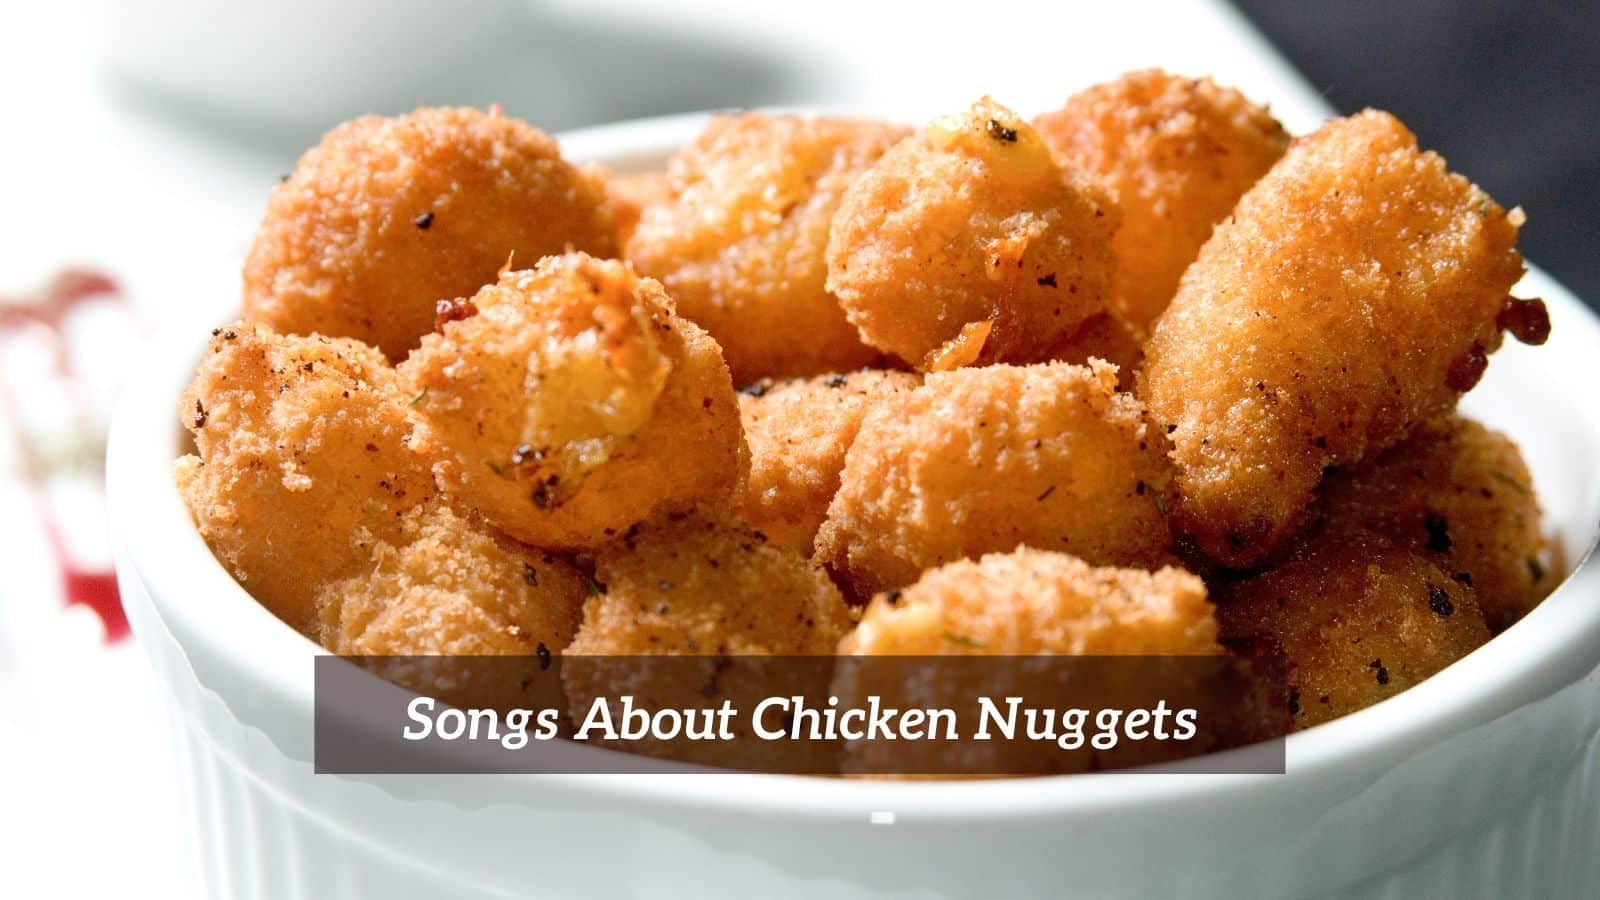 Songs About Chicken Nuggets